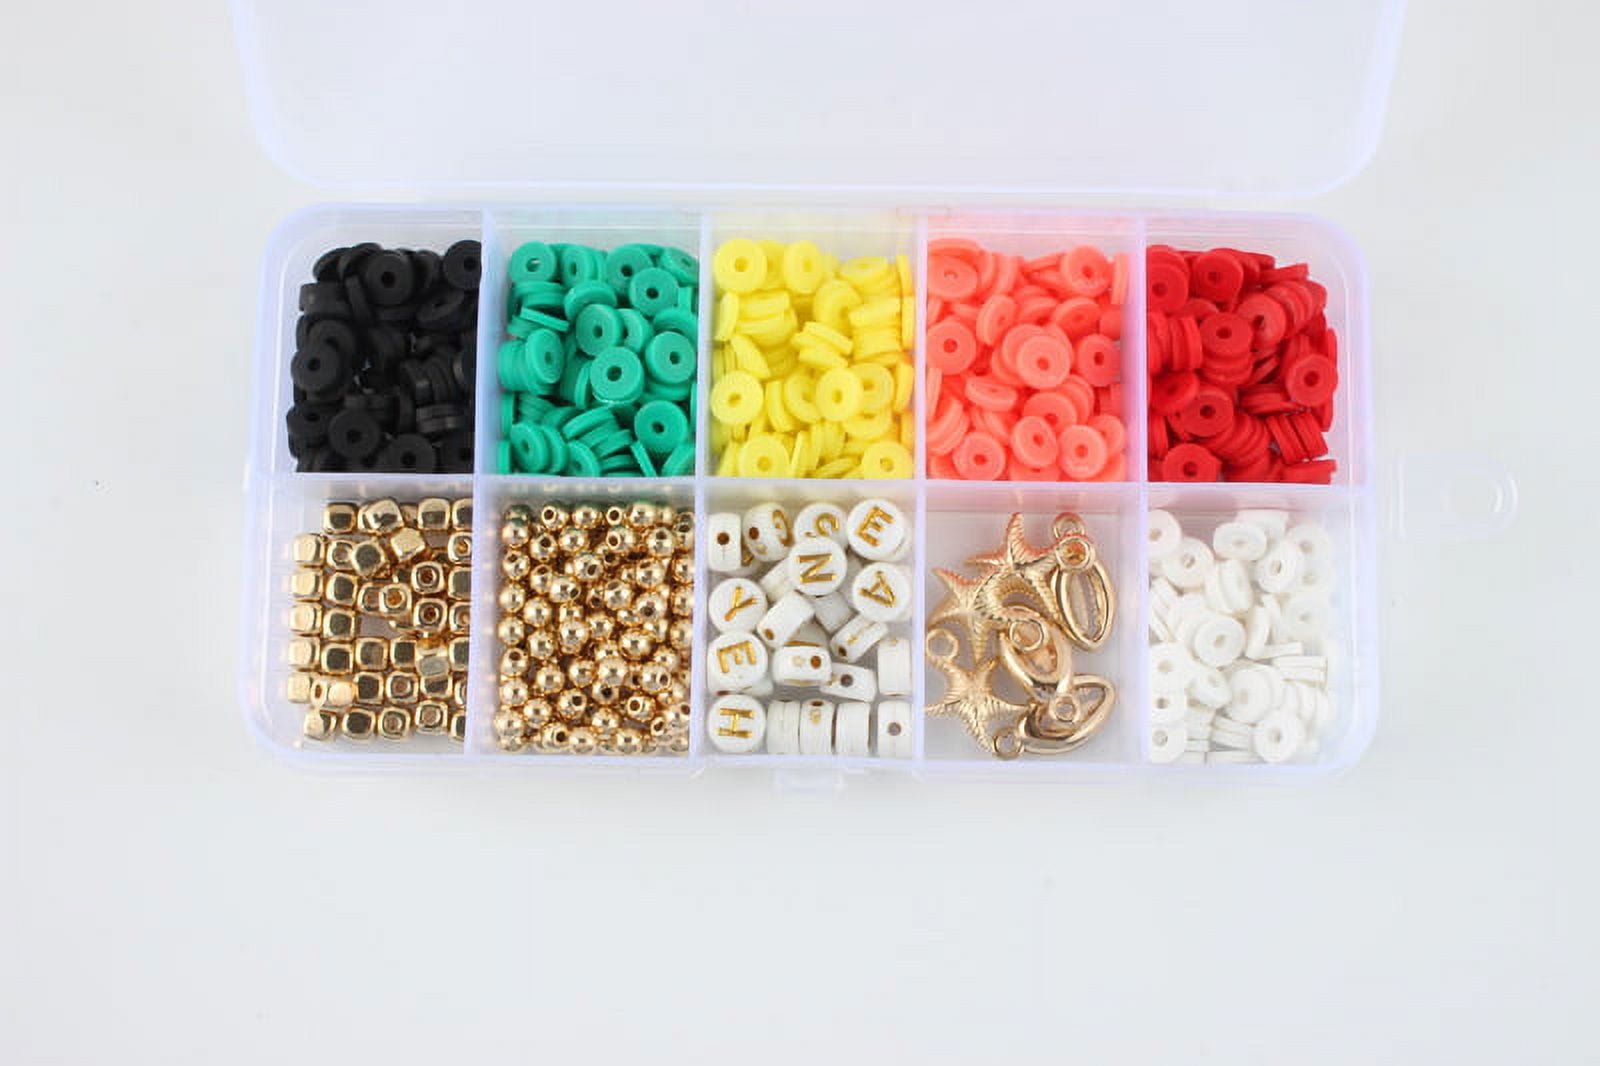 Feildoo Handmade Plastic Beads For Making Crafts Bracelets Glasses Chains  With Colorful Beads To Make Diy Projects,10 Grams Of 3Mm Pony Beads Tassel